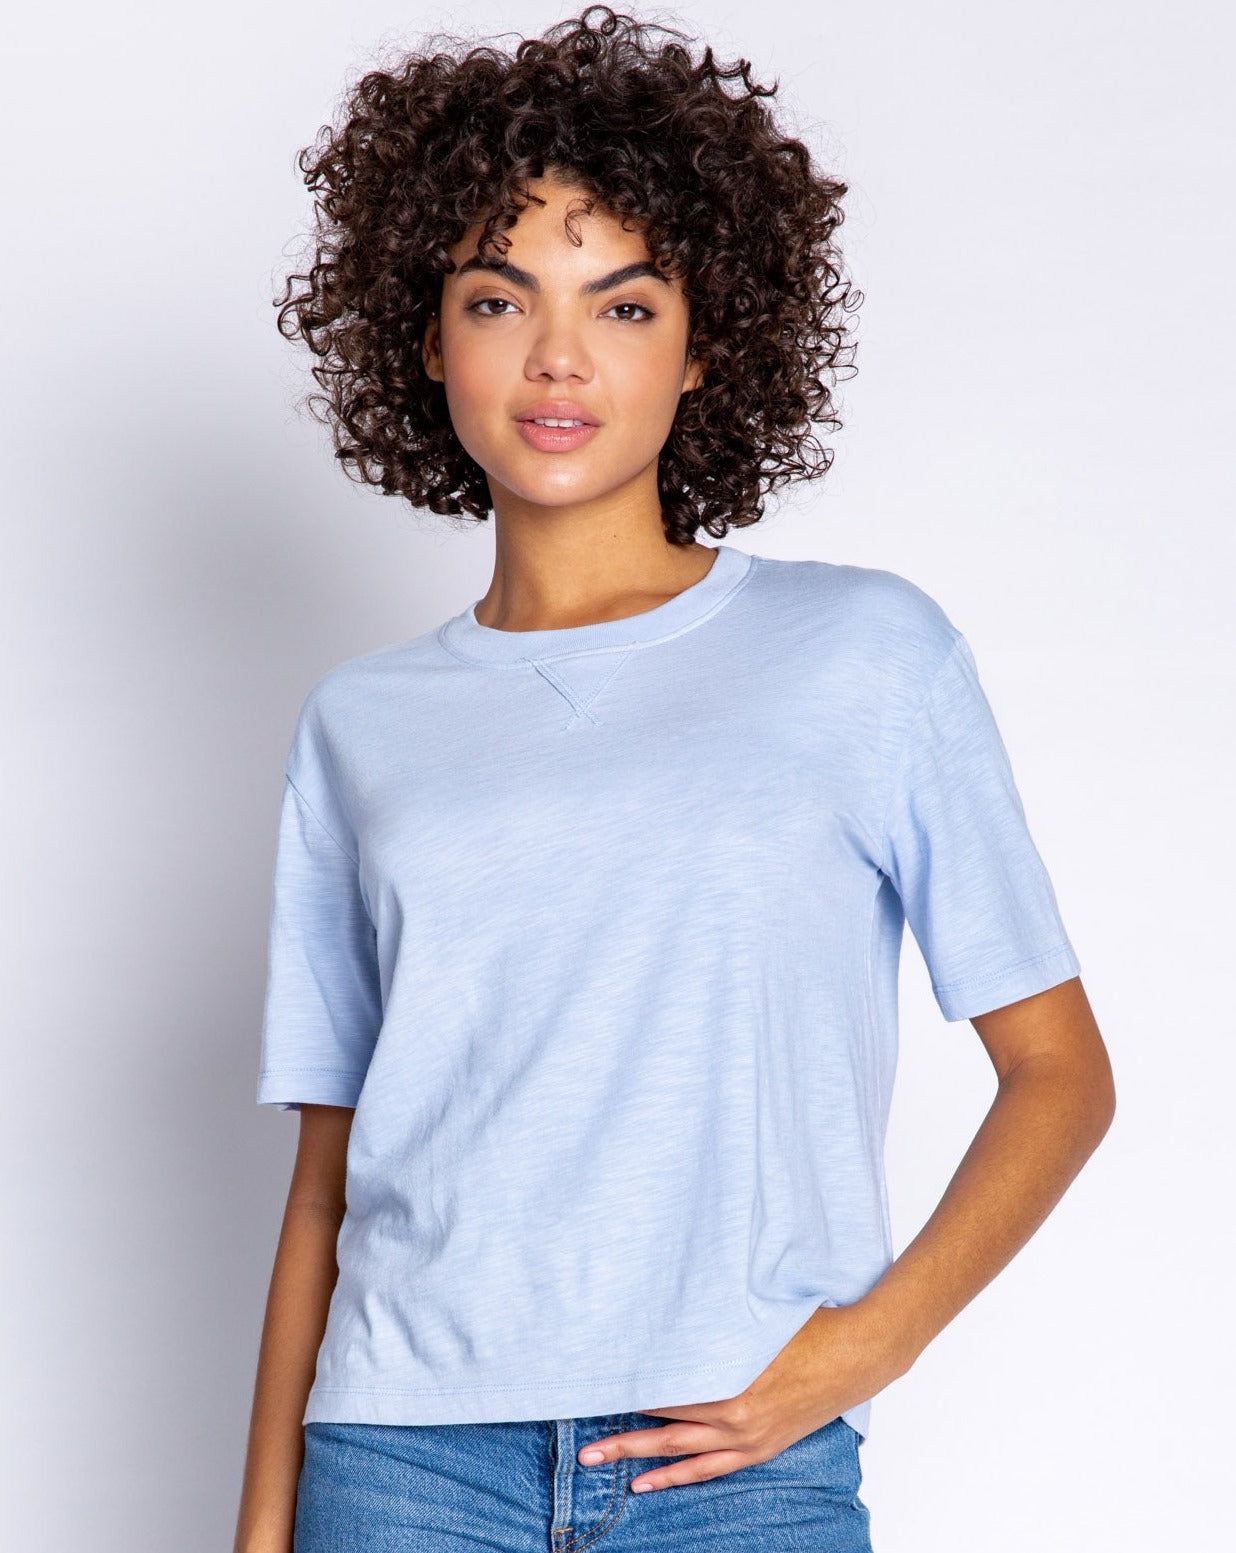 Tropical Springs Ice Blue Back To Basics Tee: Size M, L